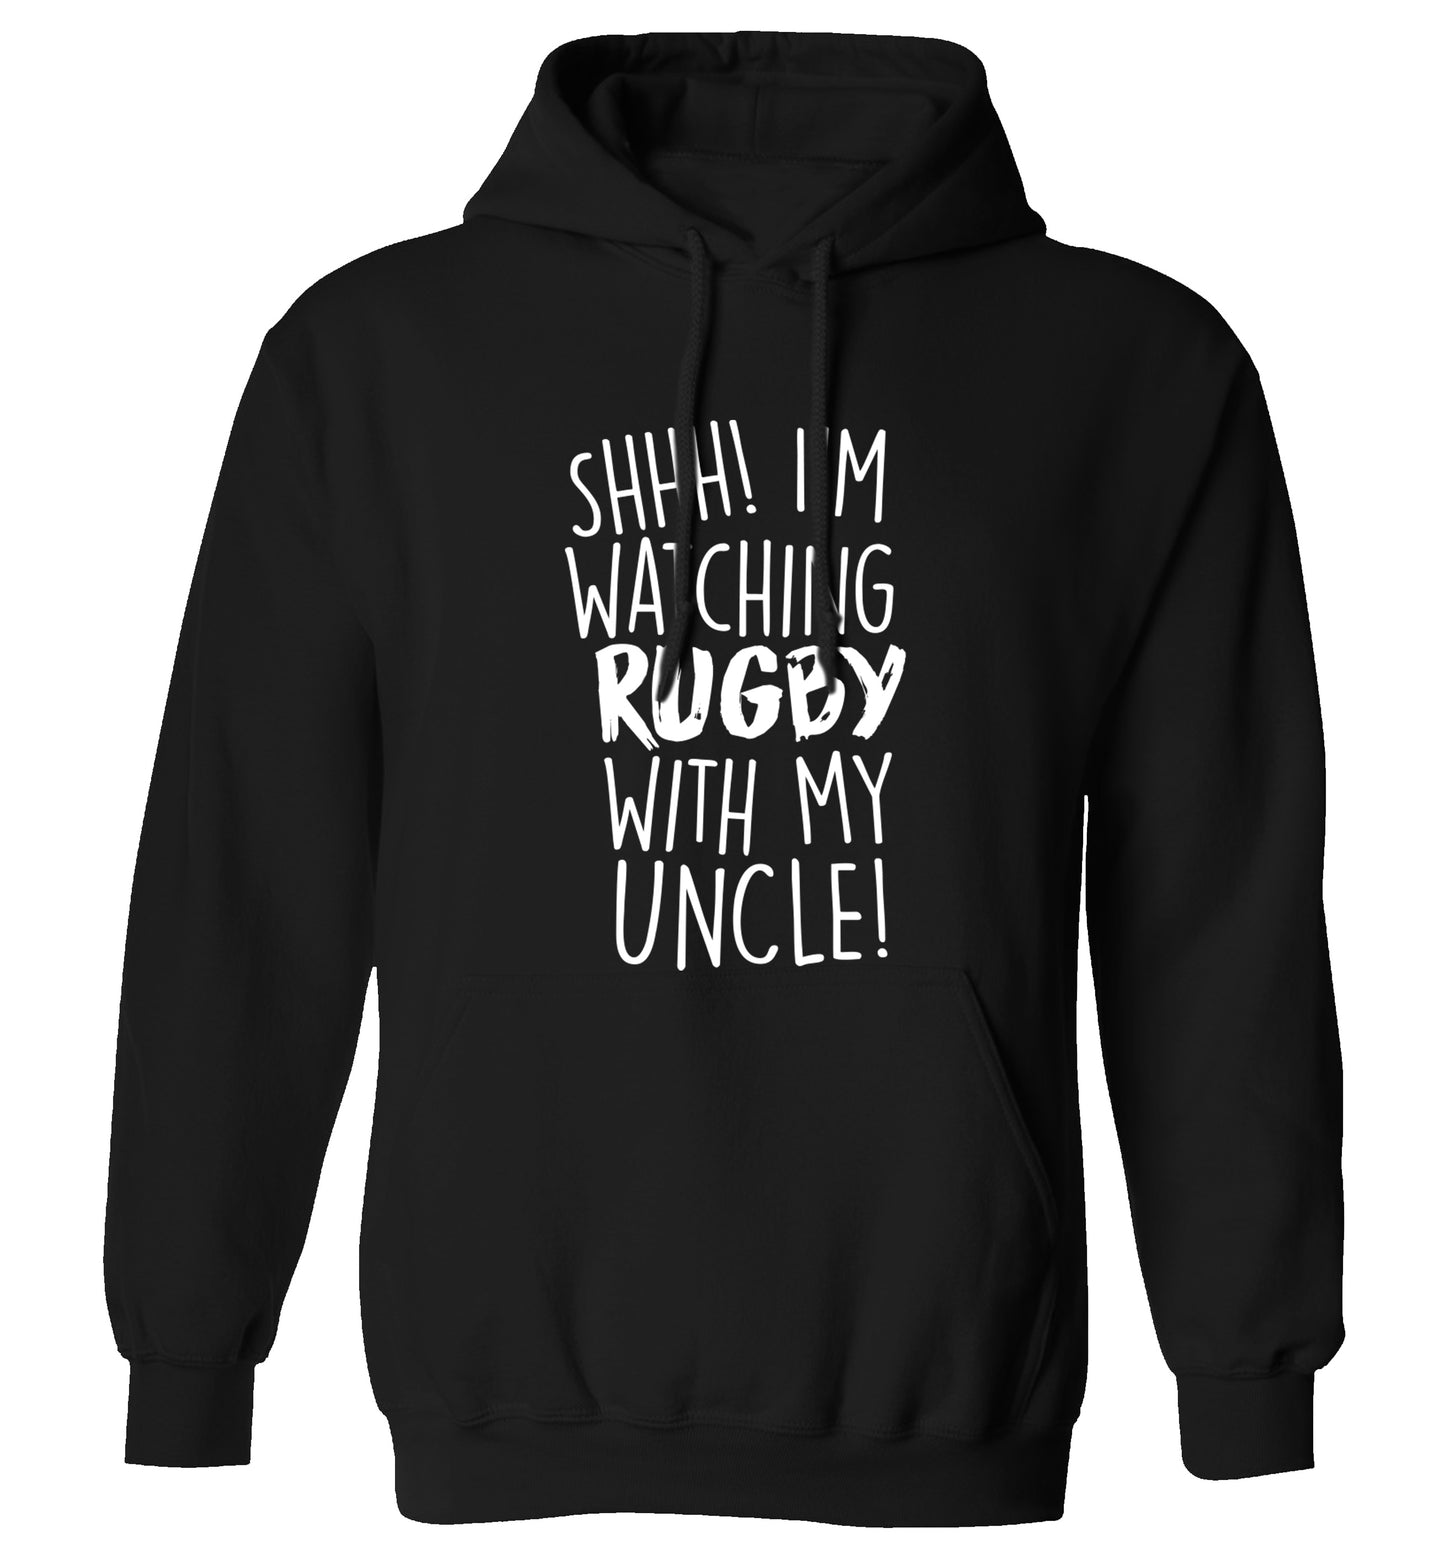 Shh.. I'm watching rugby with my uncle adults unisex black hoodie 2XL